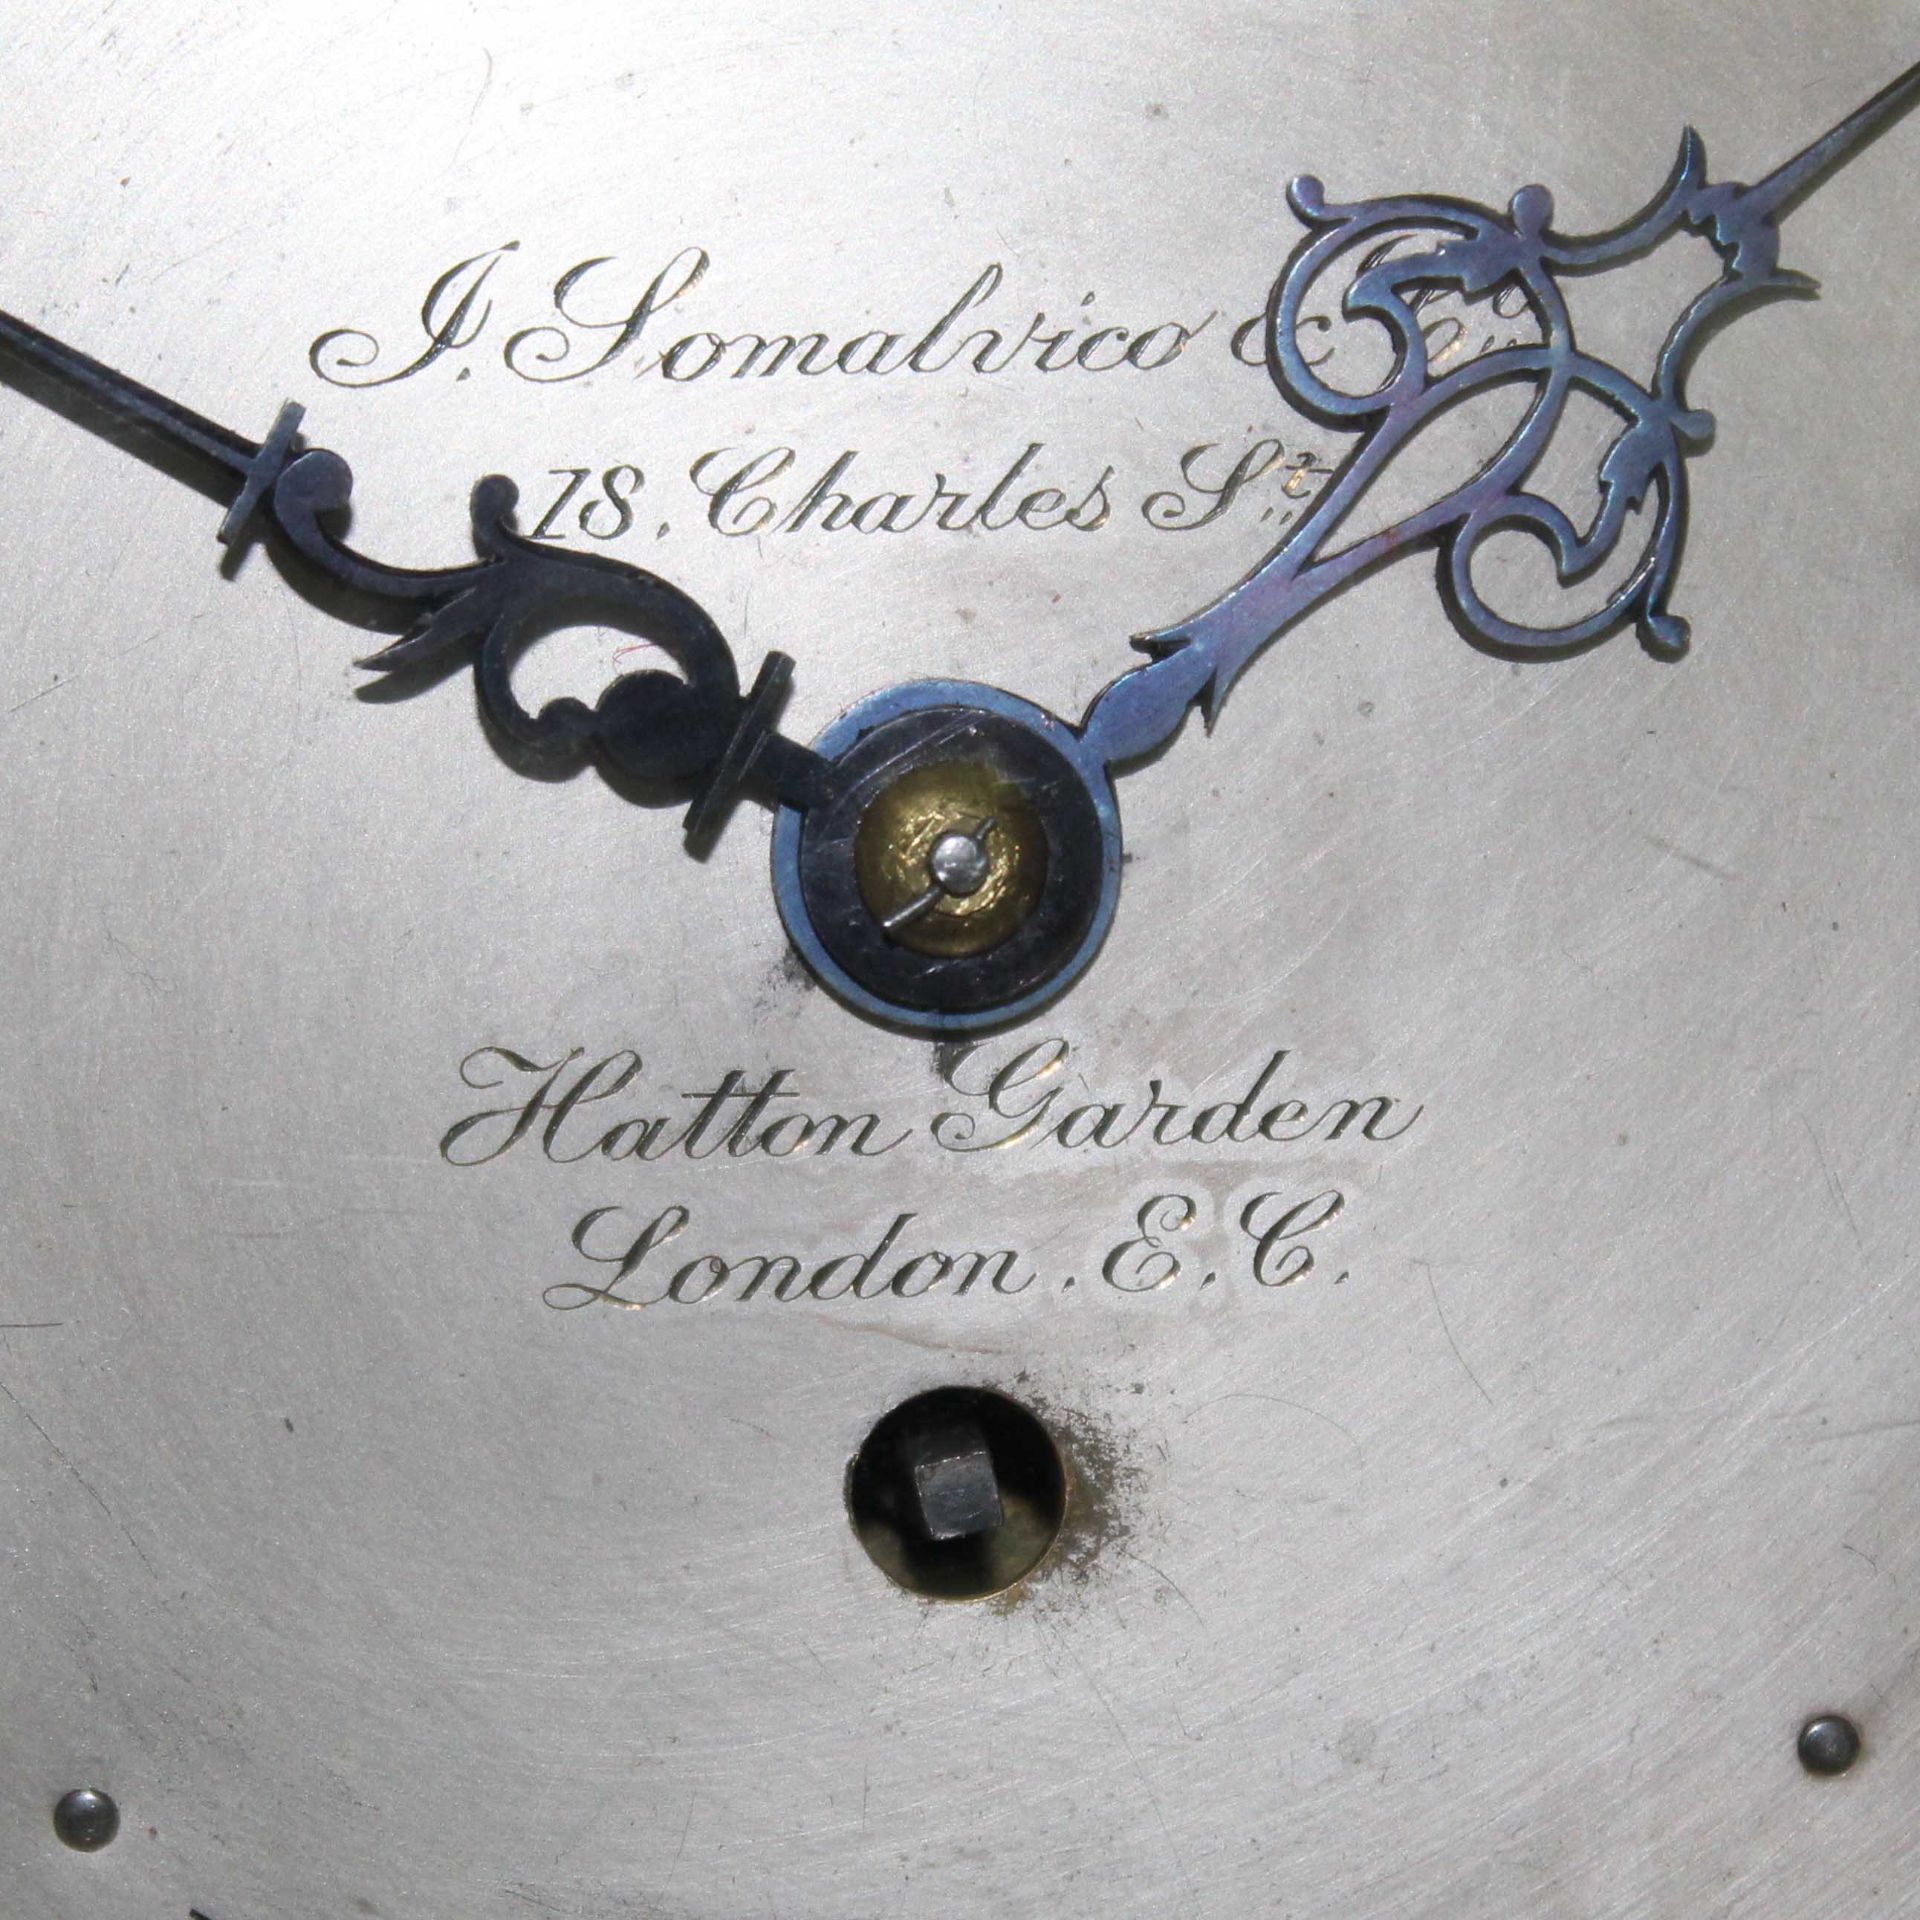 Wall clock with thermometer. "J. Somalvico Co. London". - Image 10 of 13